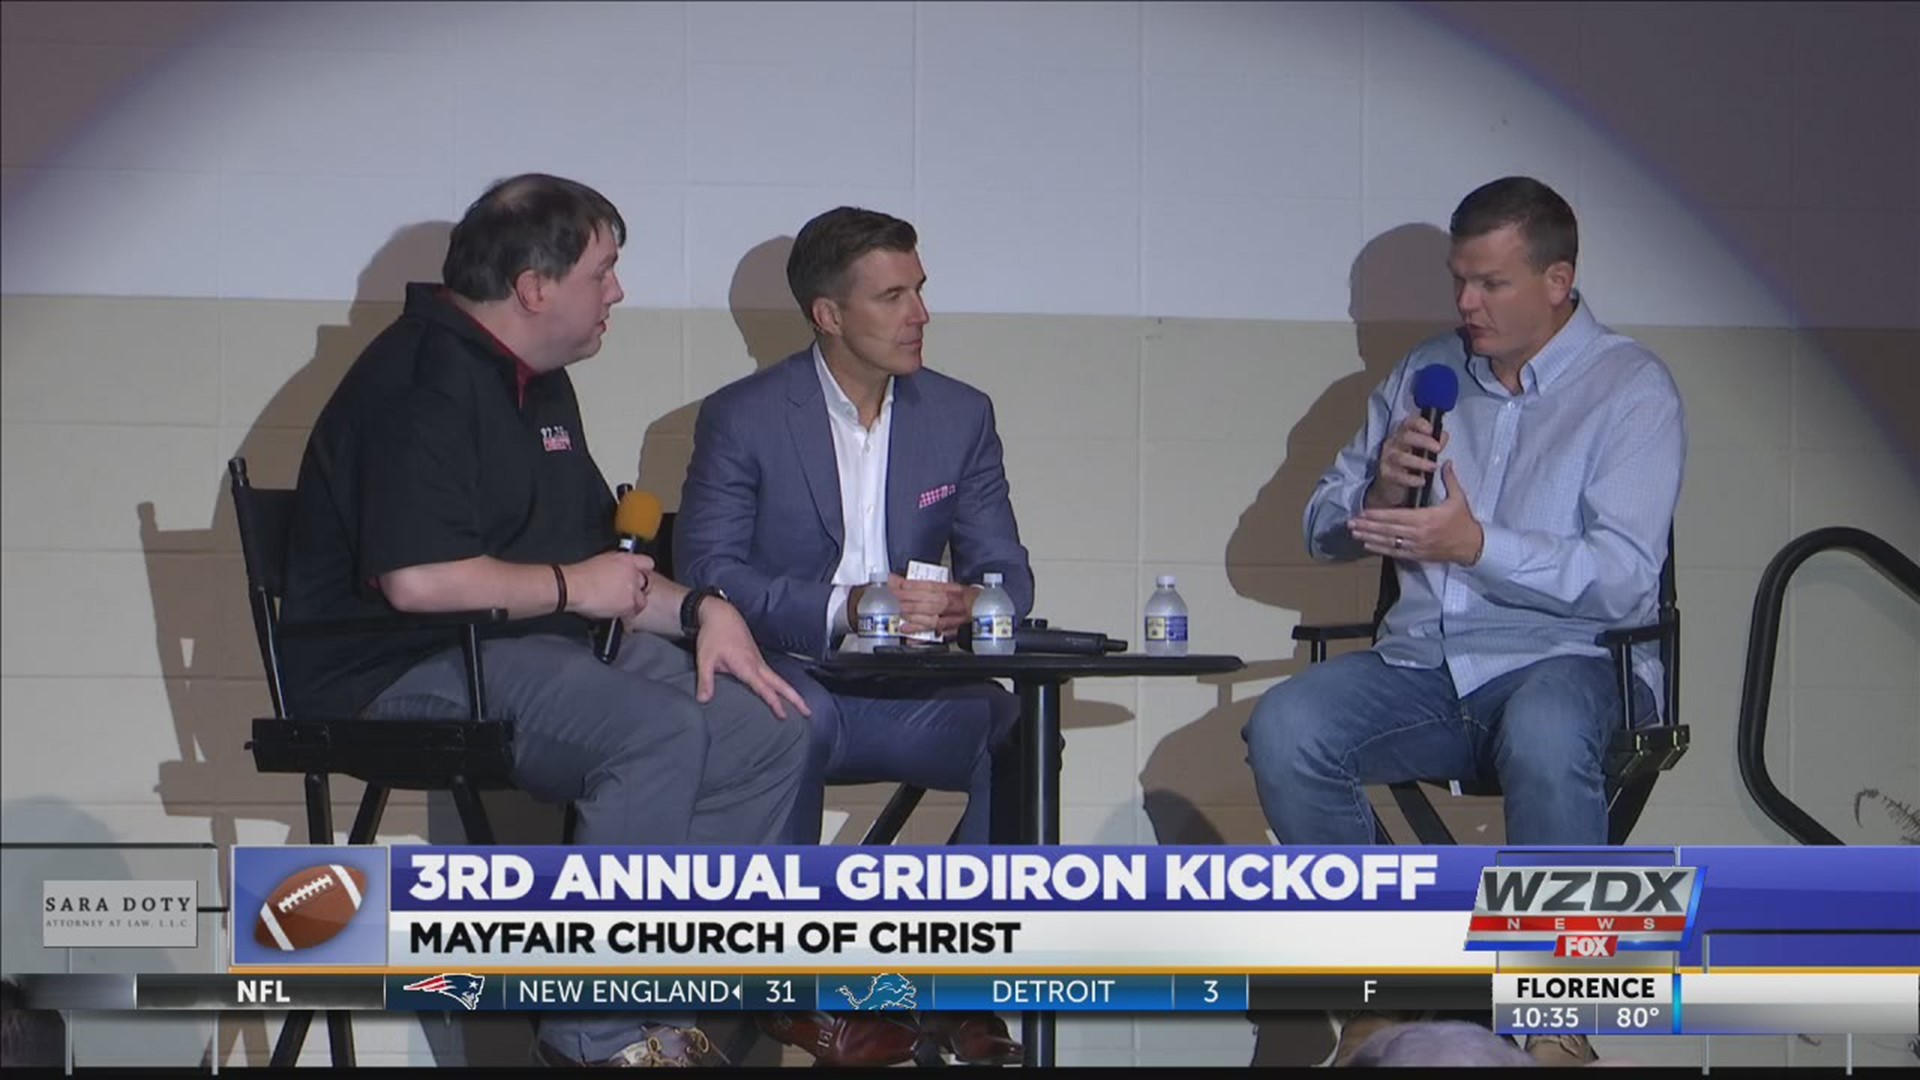 Muscle Shoals native and ESPN College Gameday host Rece Davis spoke to a crowd 550 at the Mayfair Church or Christ for their annual "Gridiron Kickoff" event